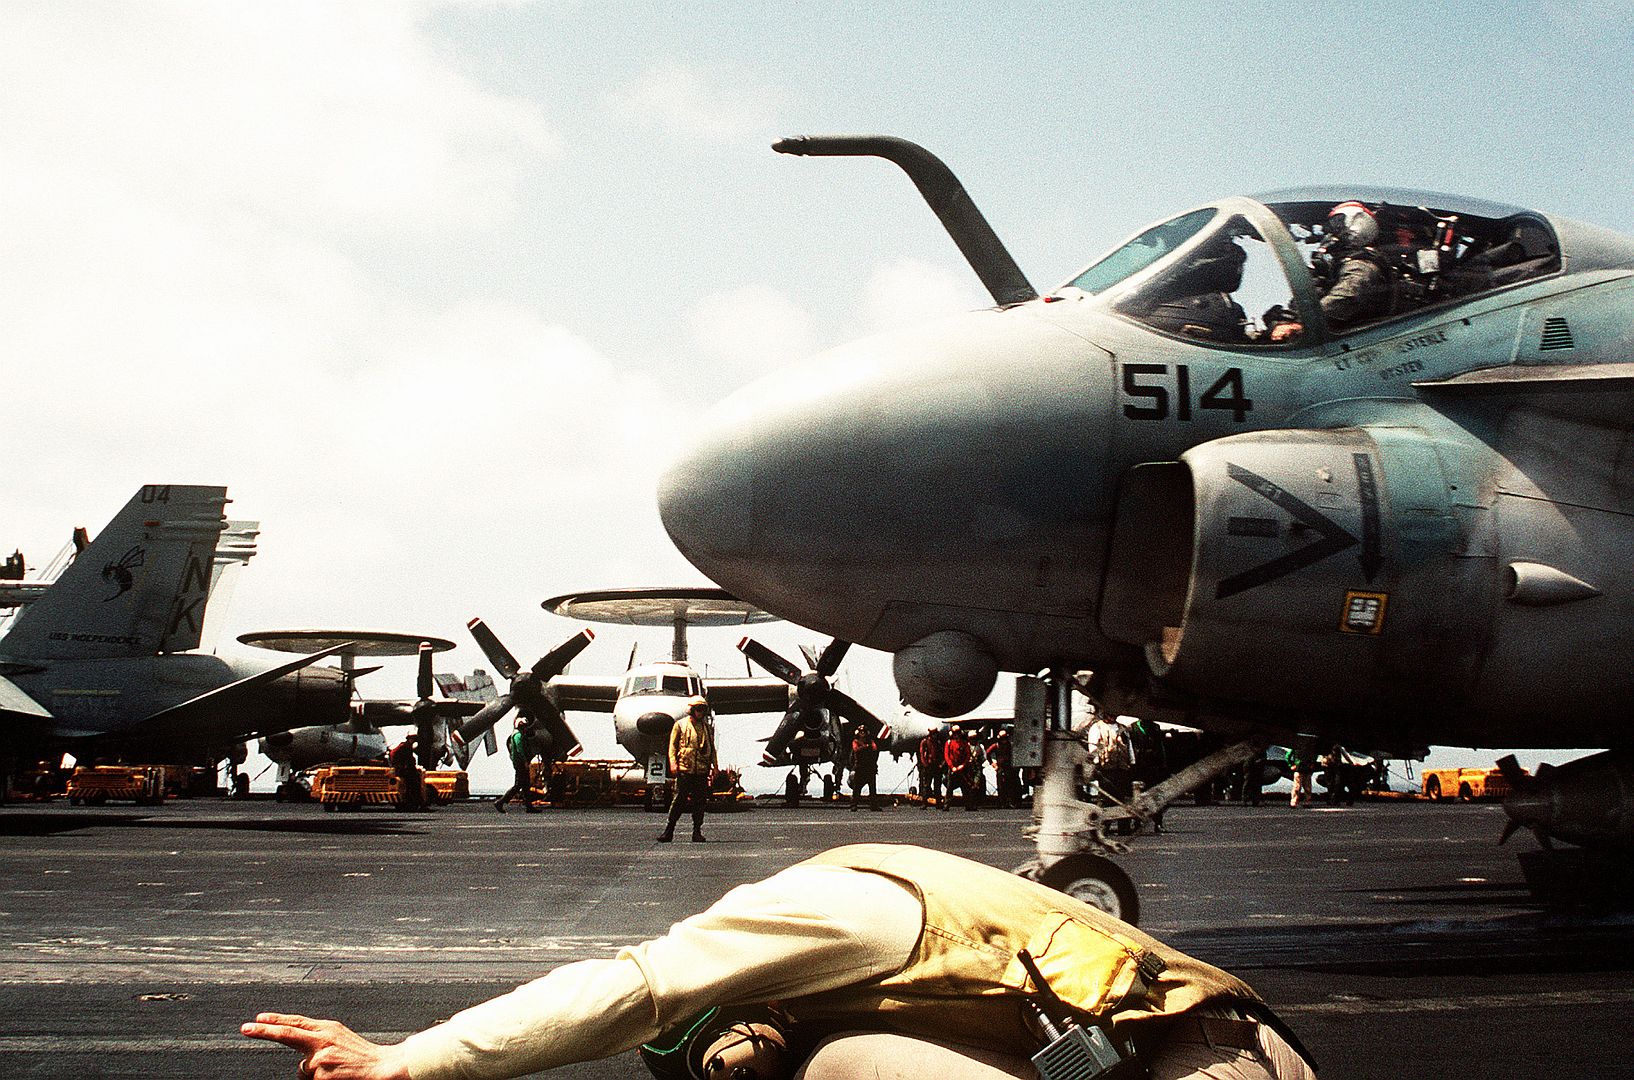 A Catapult Officer Signals For The Launch Of An Attack Squadron 196 A 6E Intruder Aircraft On The Flight Deck Of The Aircraft Carrier USS INDEPENDENCE During Operation Desert Shield